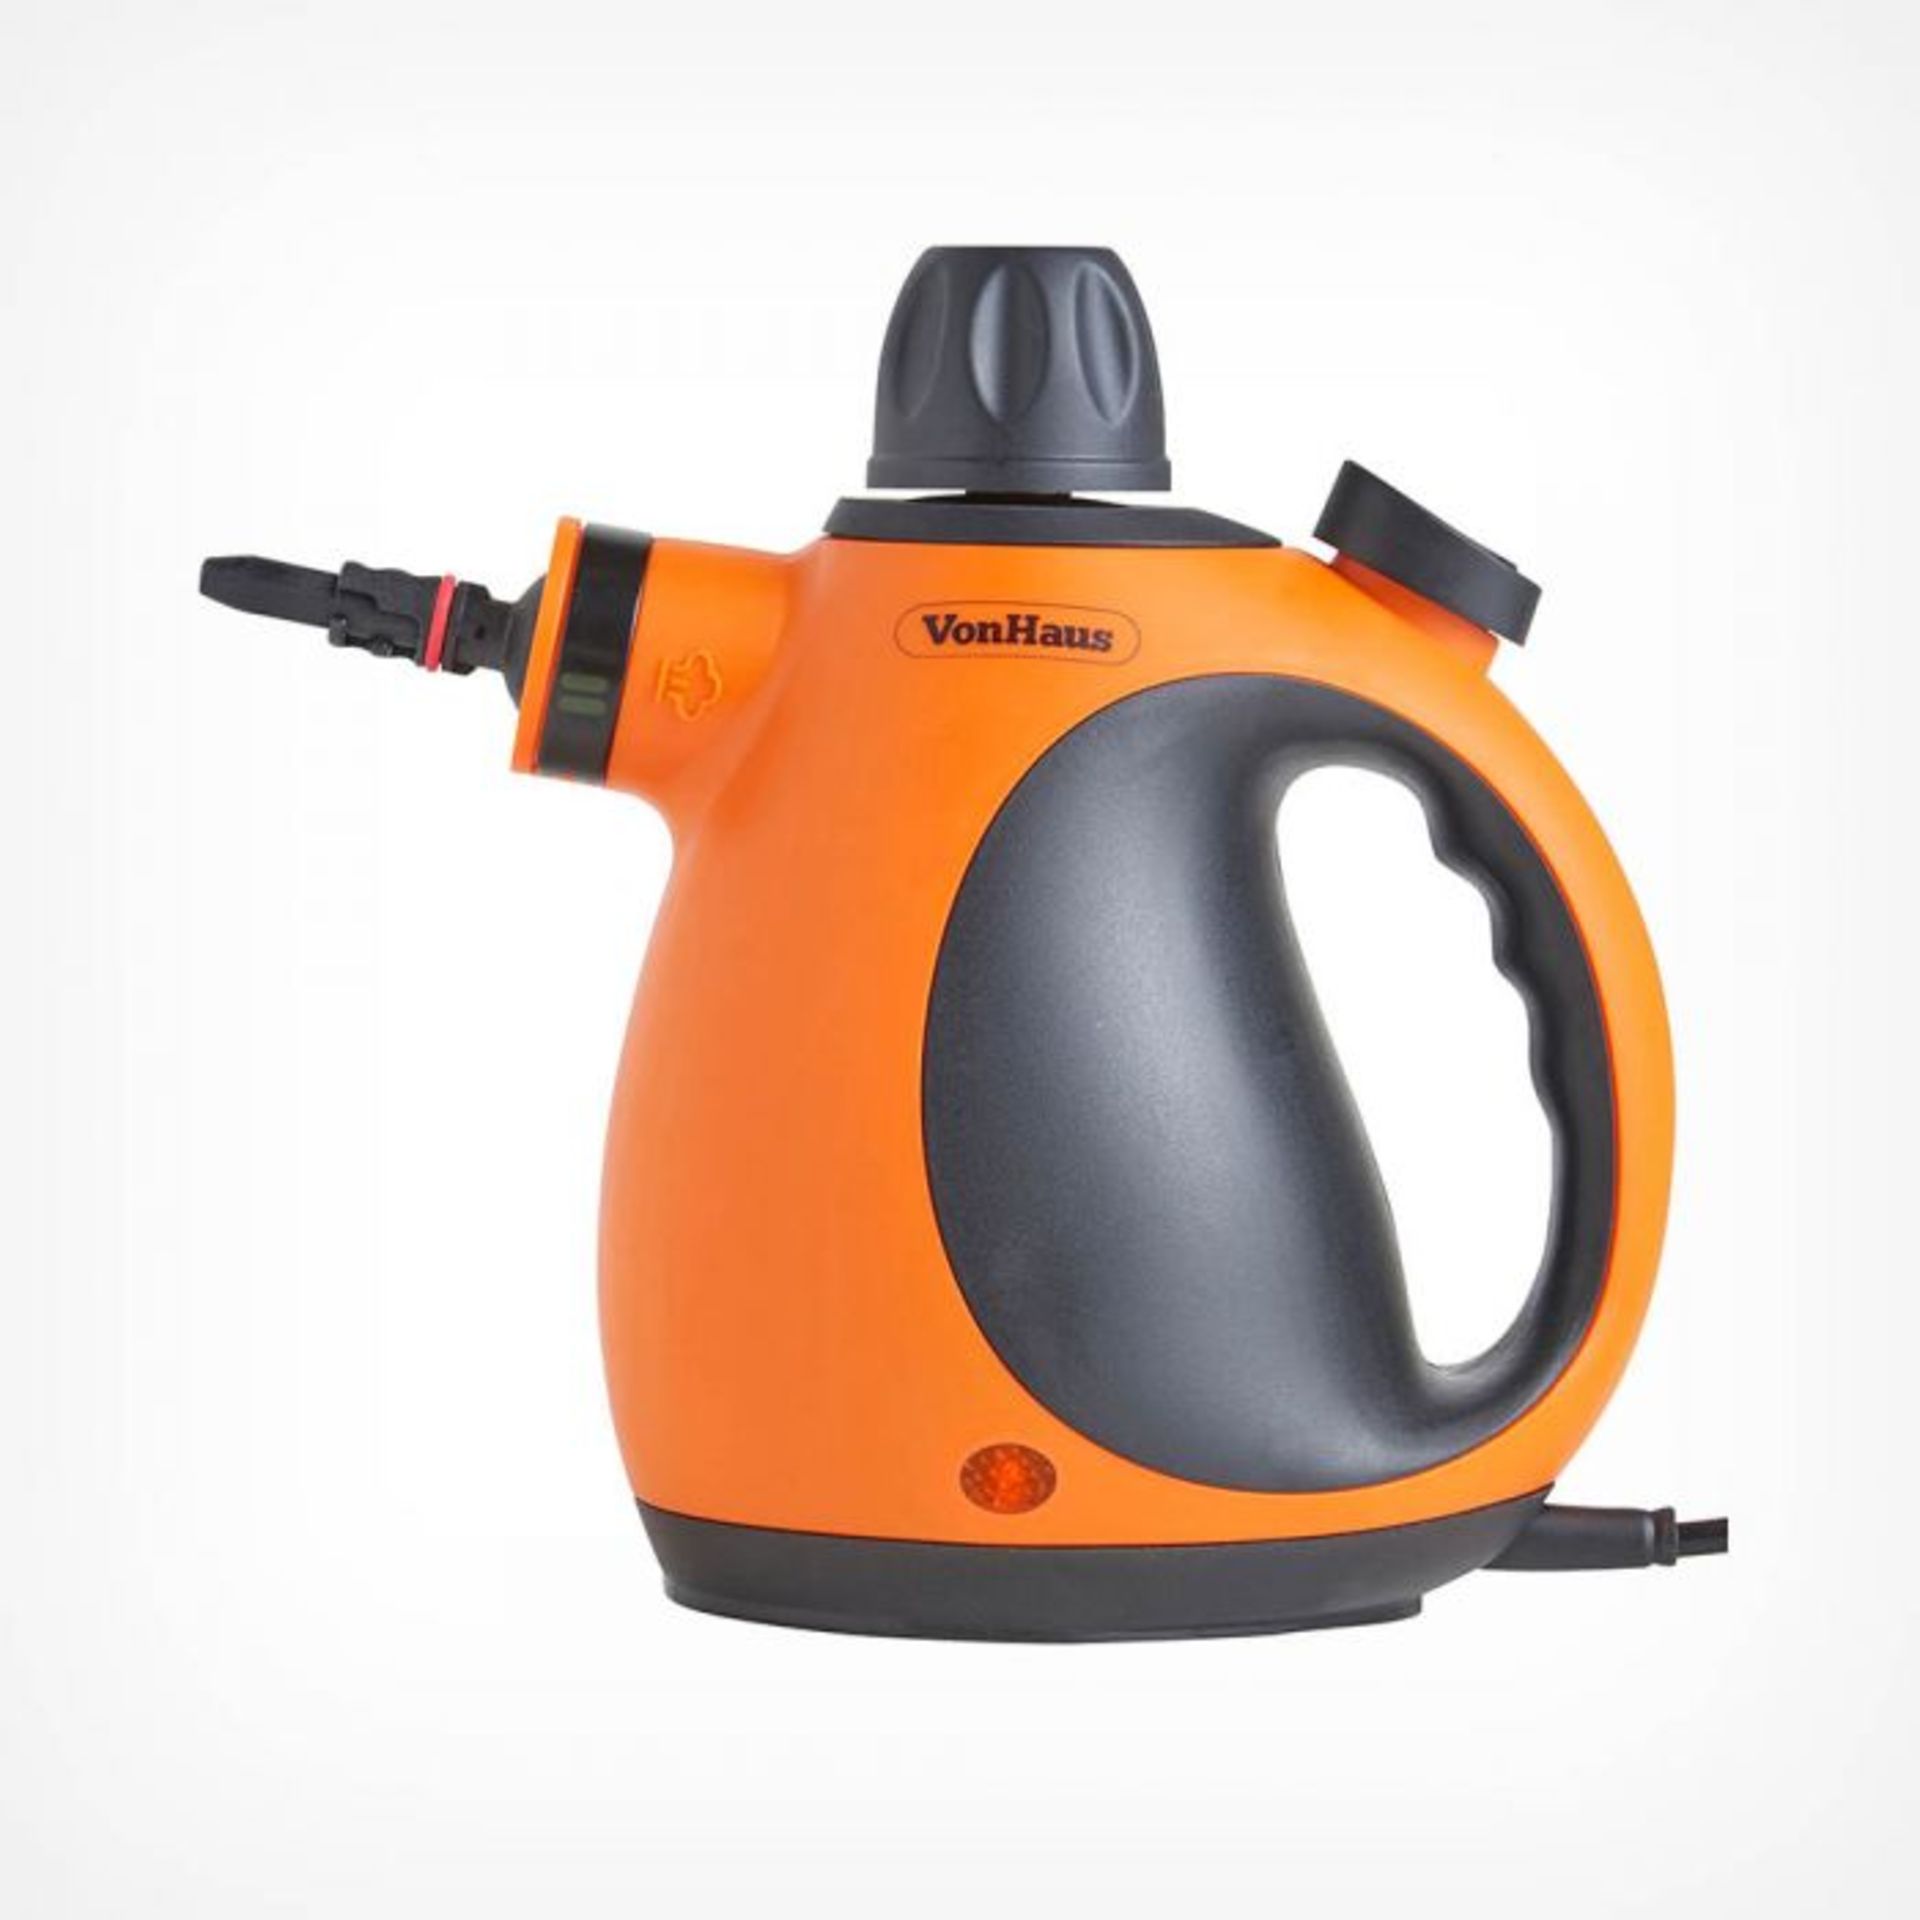 Hand Held Steam Cleaner. Use the power of steam to a spotlessly clean home